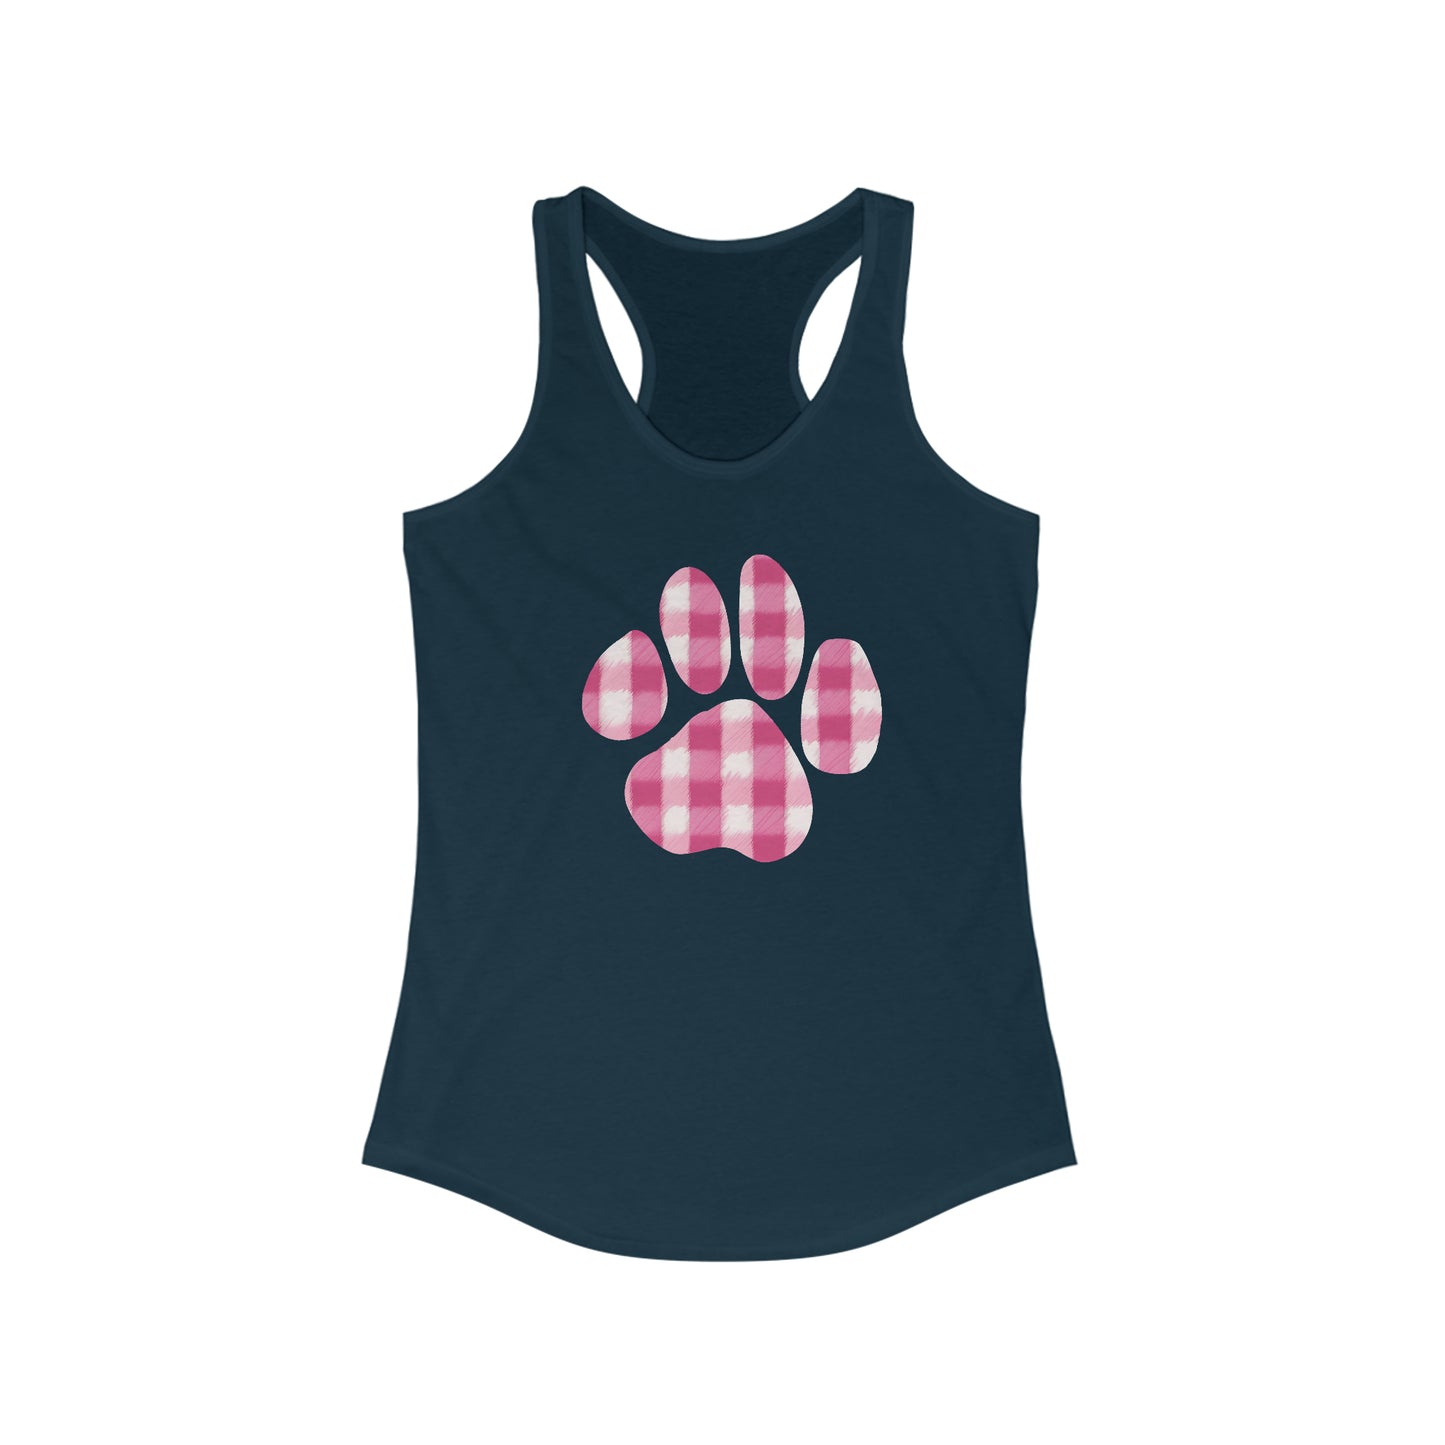 Pawsitively Adorable Women's Tank Top - Trendy Paw Print Design - Perfect Gift for Animal Lovers!